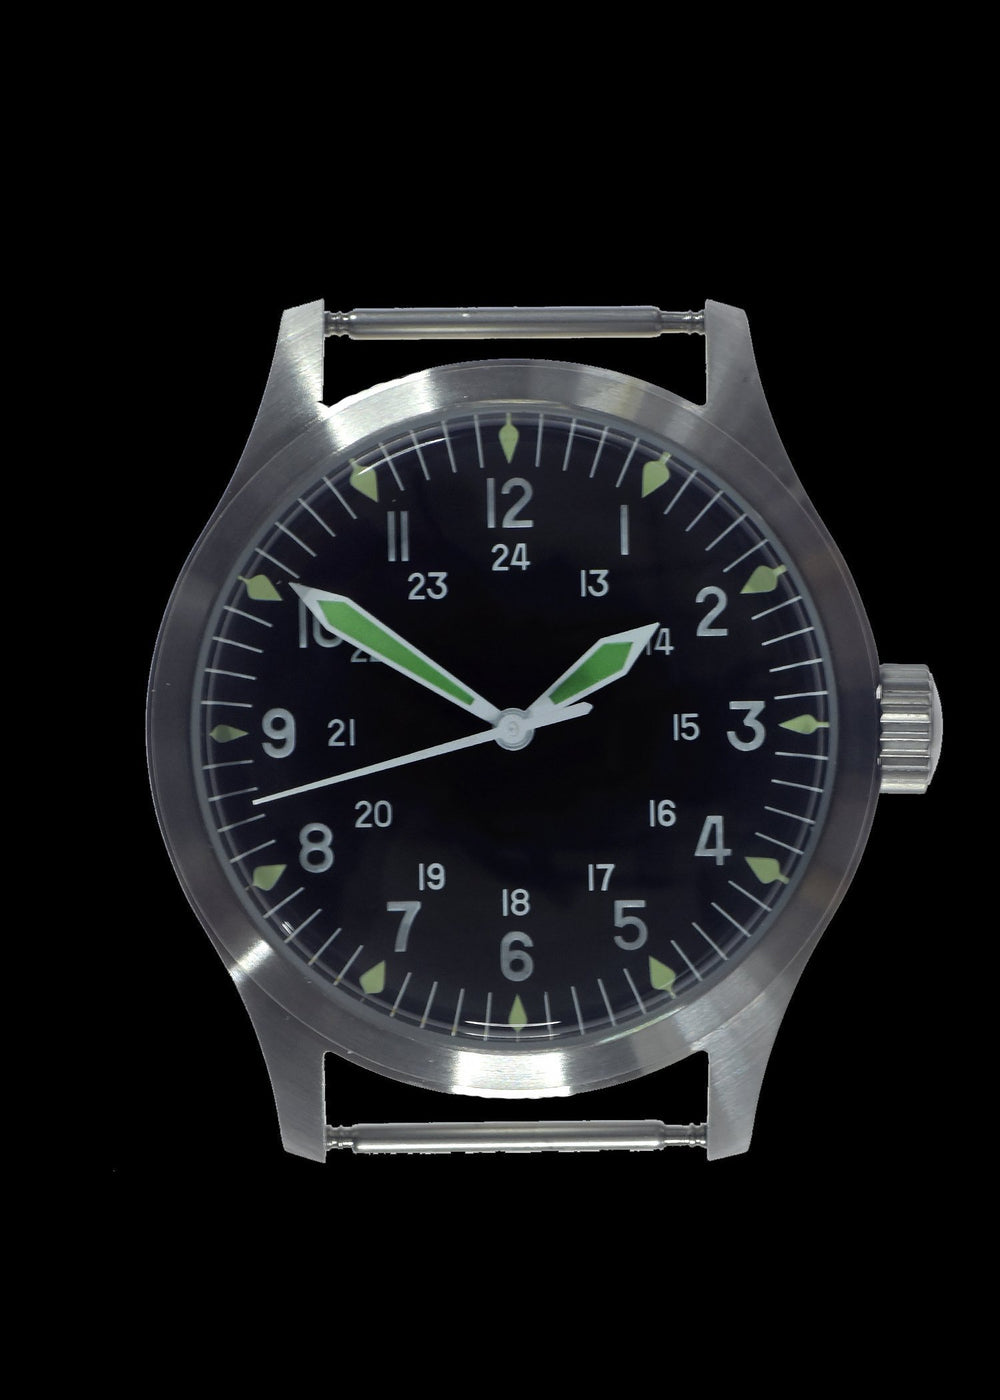 MWC Classic Watch - 1960s / 70s U.S Pattern Vietnam War Issue Watch, 24 Jewel Automatic Movement and 100m Water Resistance